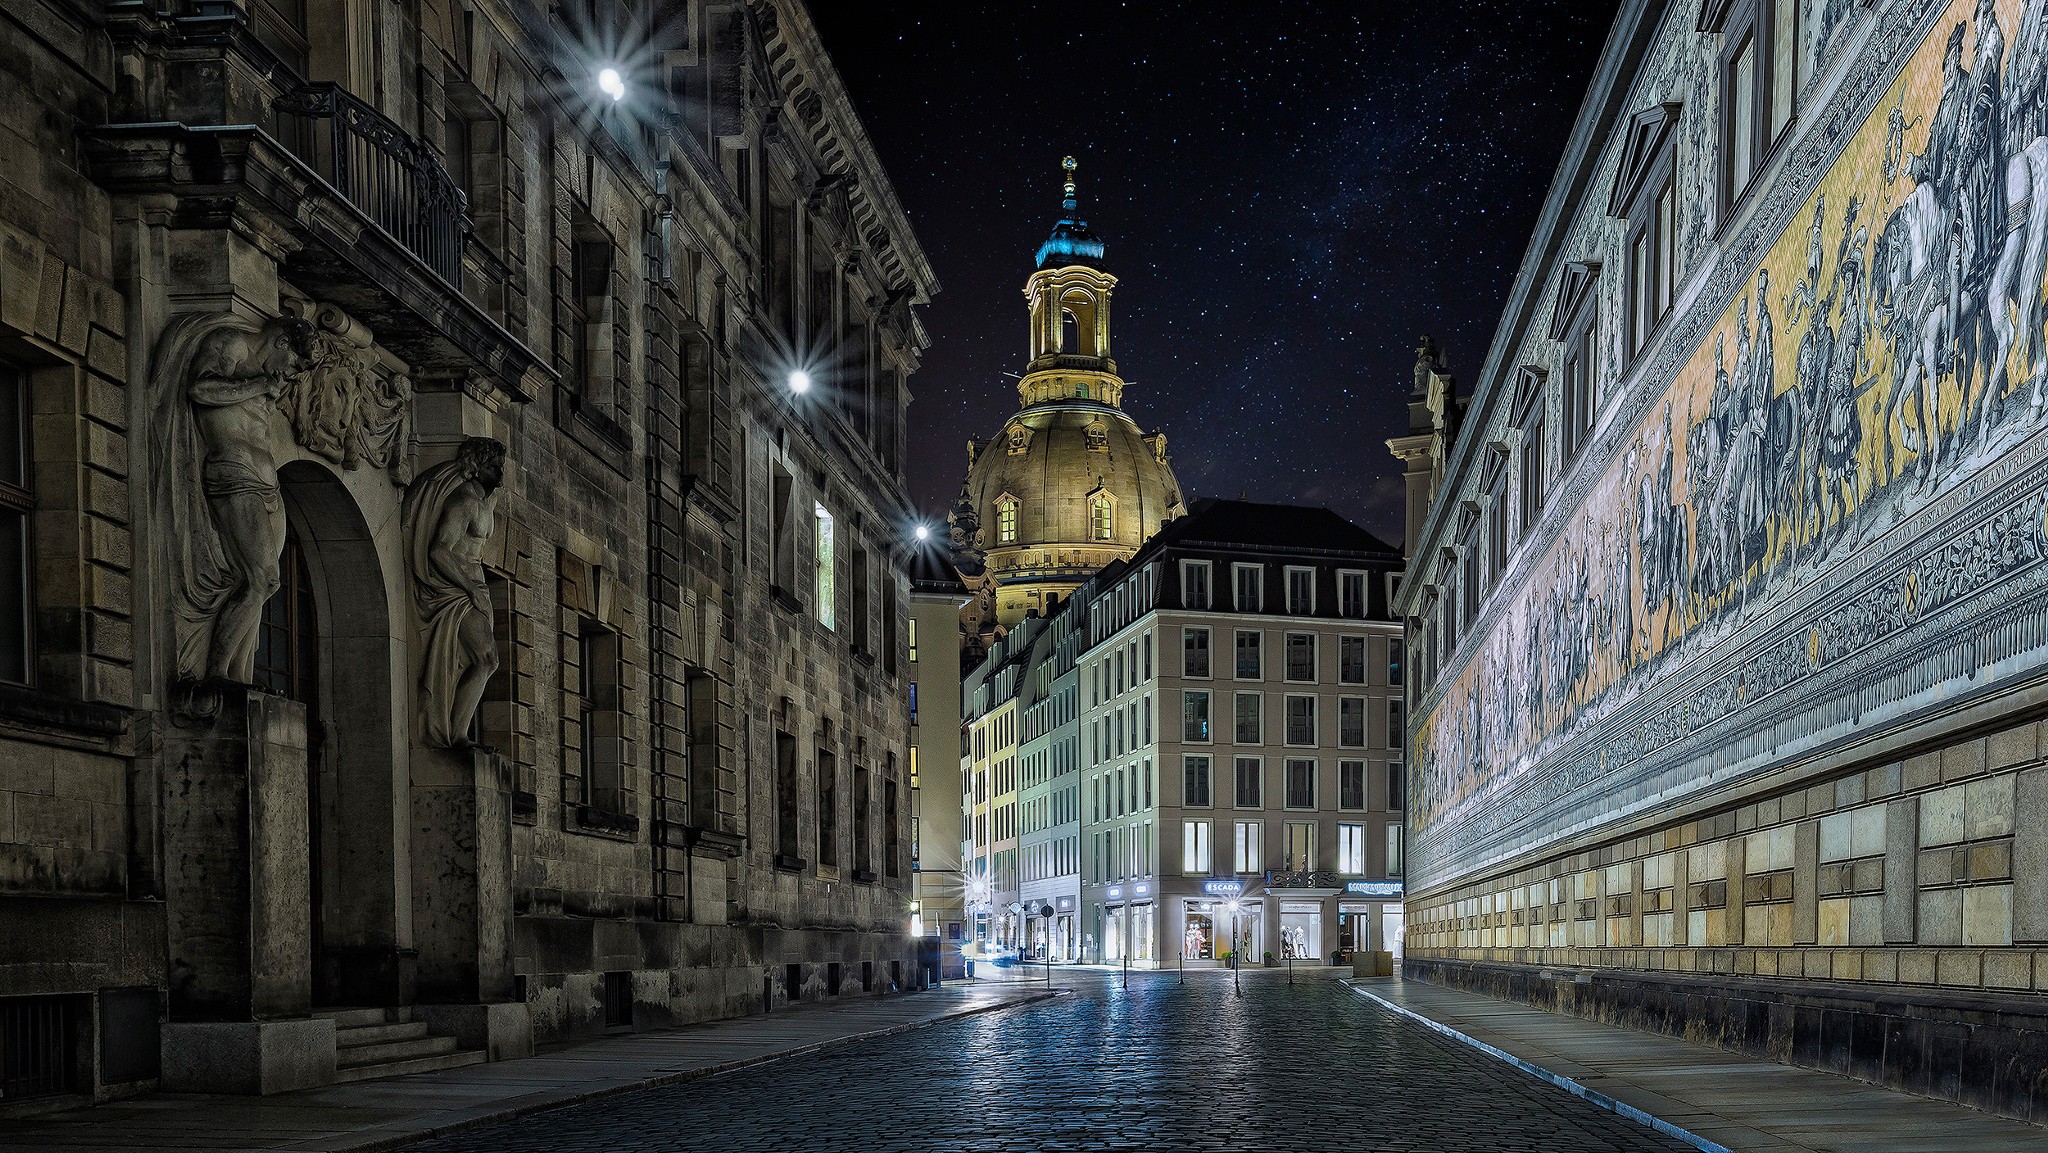 General 2048x1153 cityscape architecture old building city street street light church Germany stars sculpture Europe Dresden